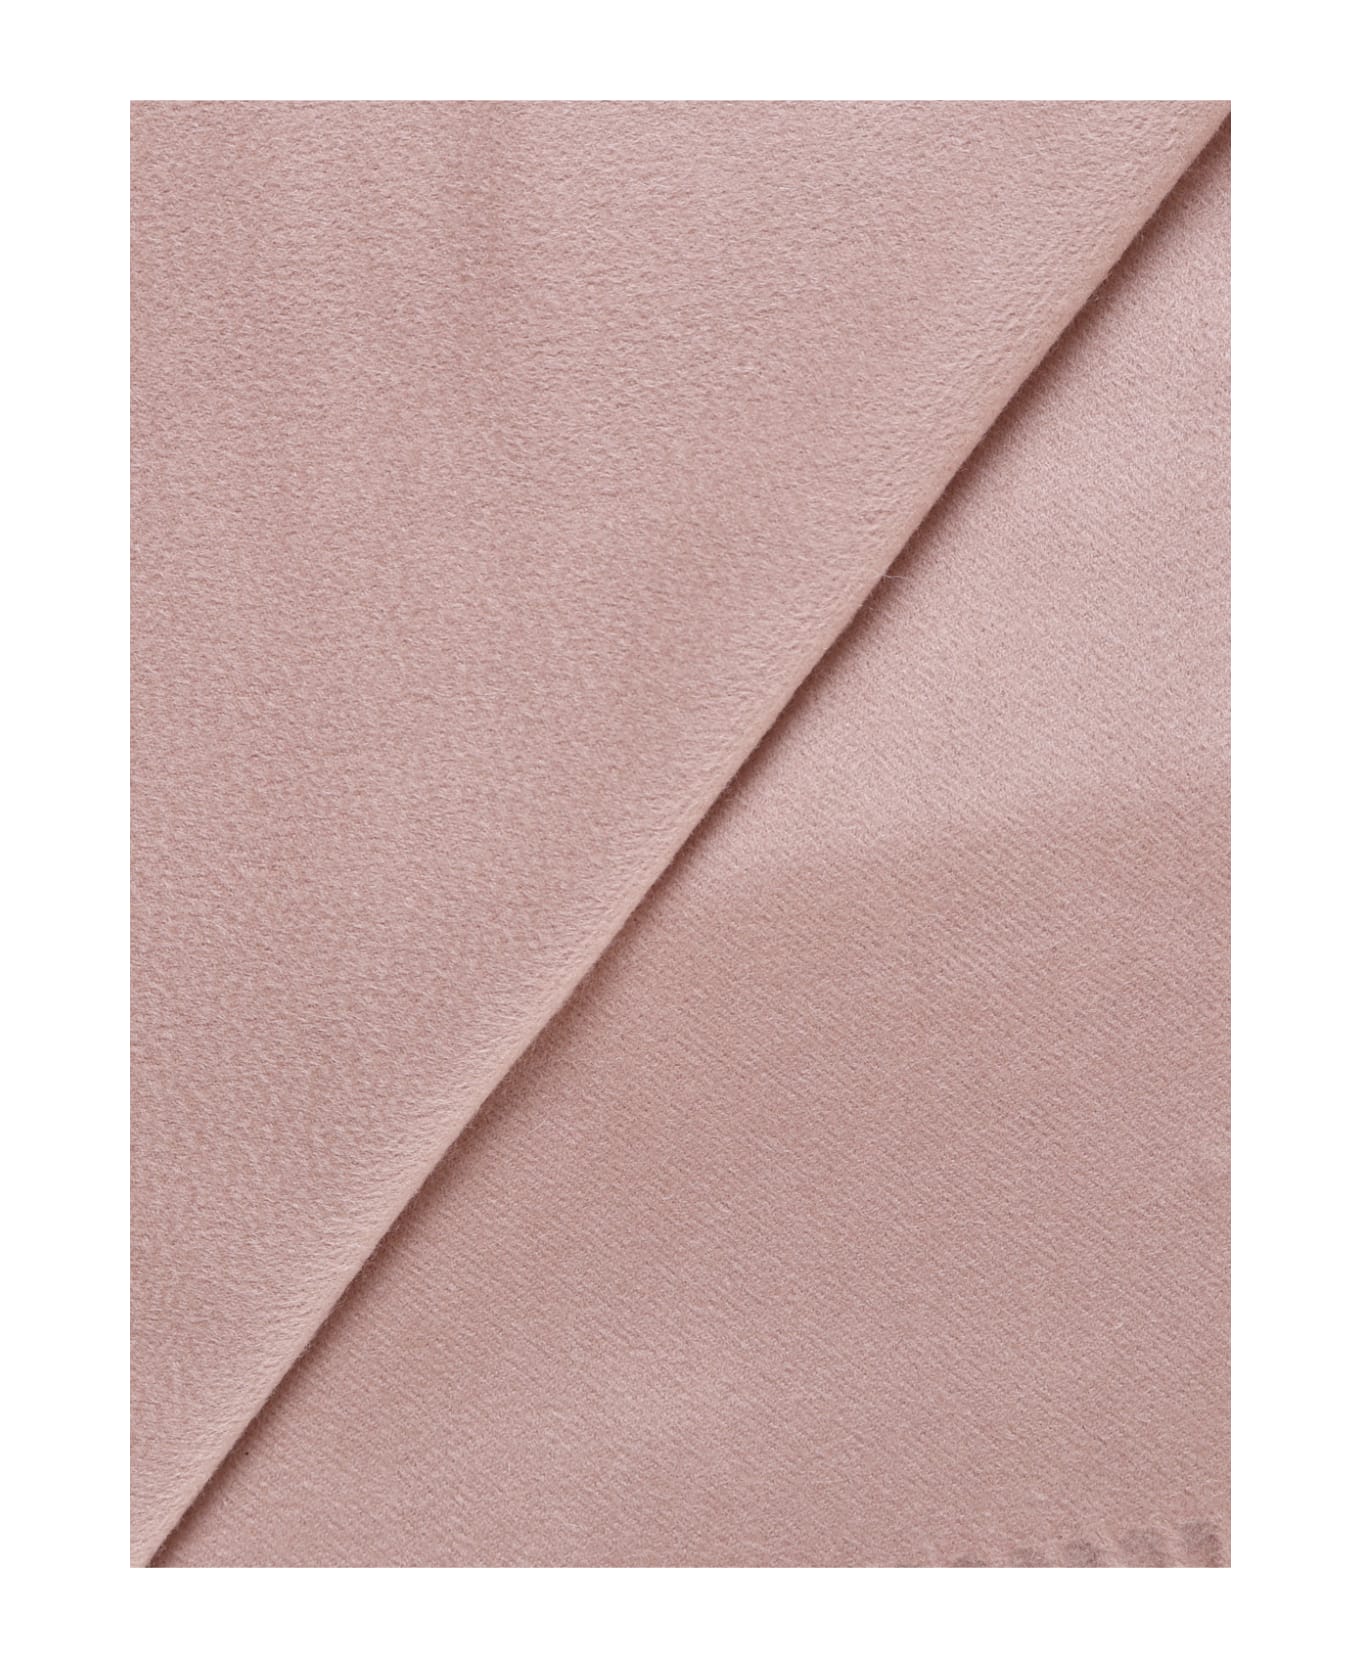 Max Mara Stole In Pure Sable Cashmere - Pink スカーフ＆ストール